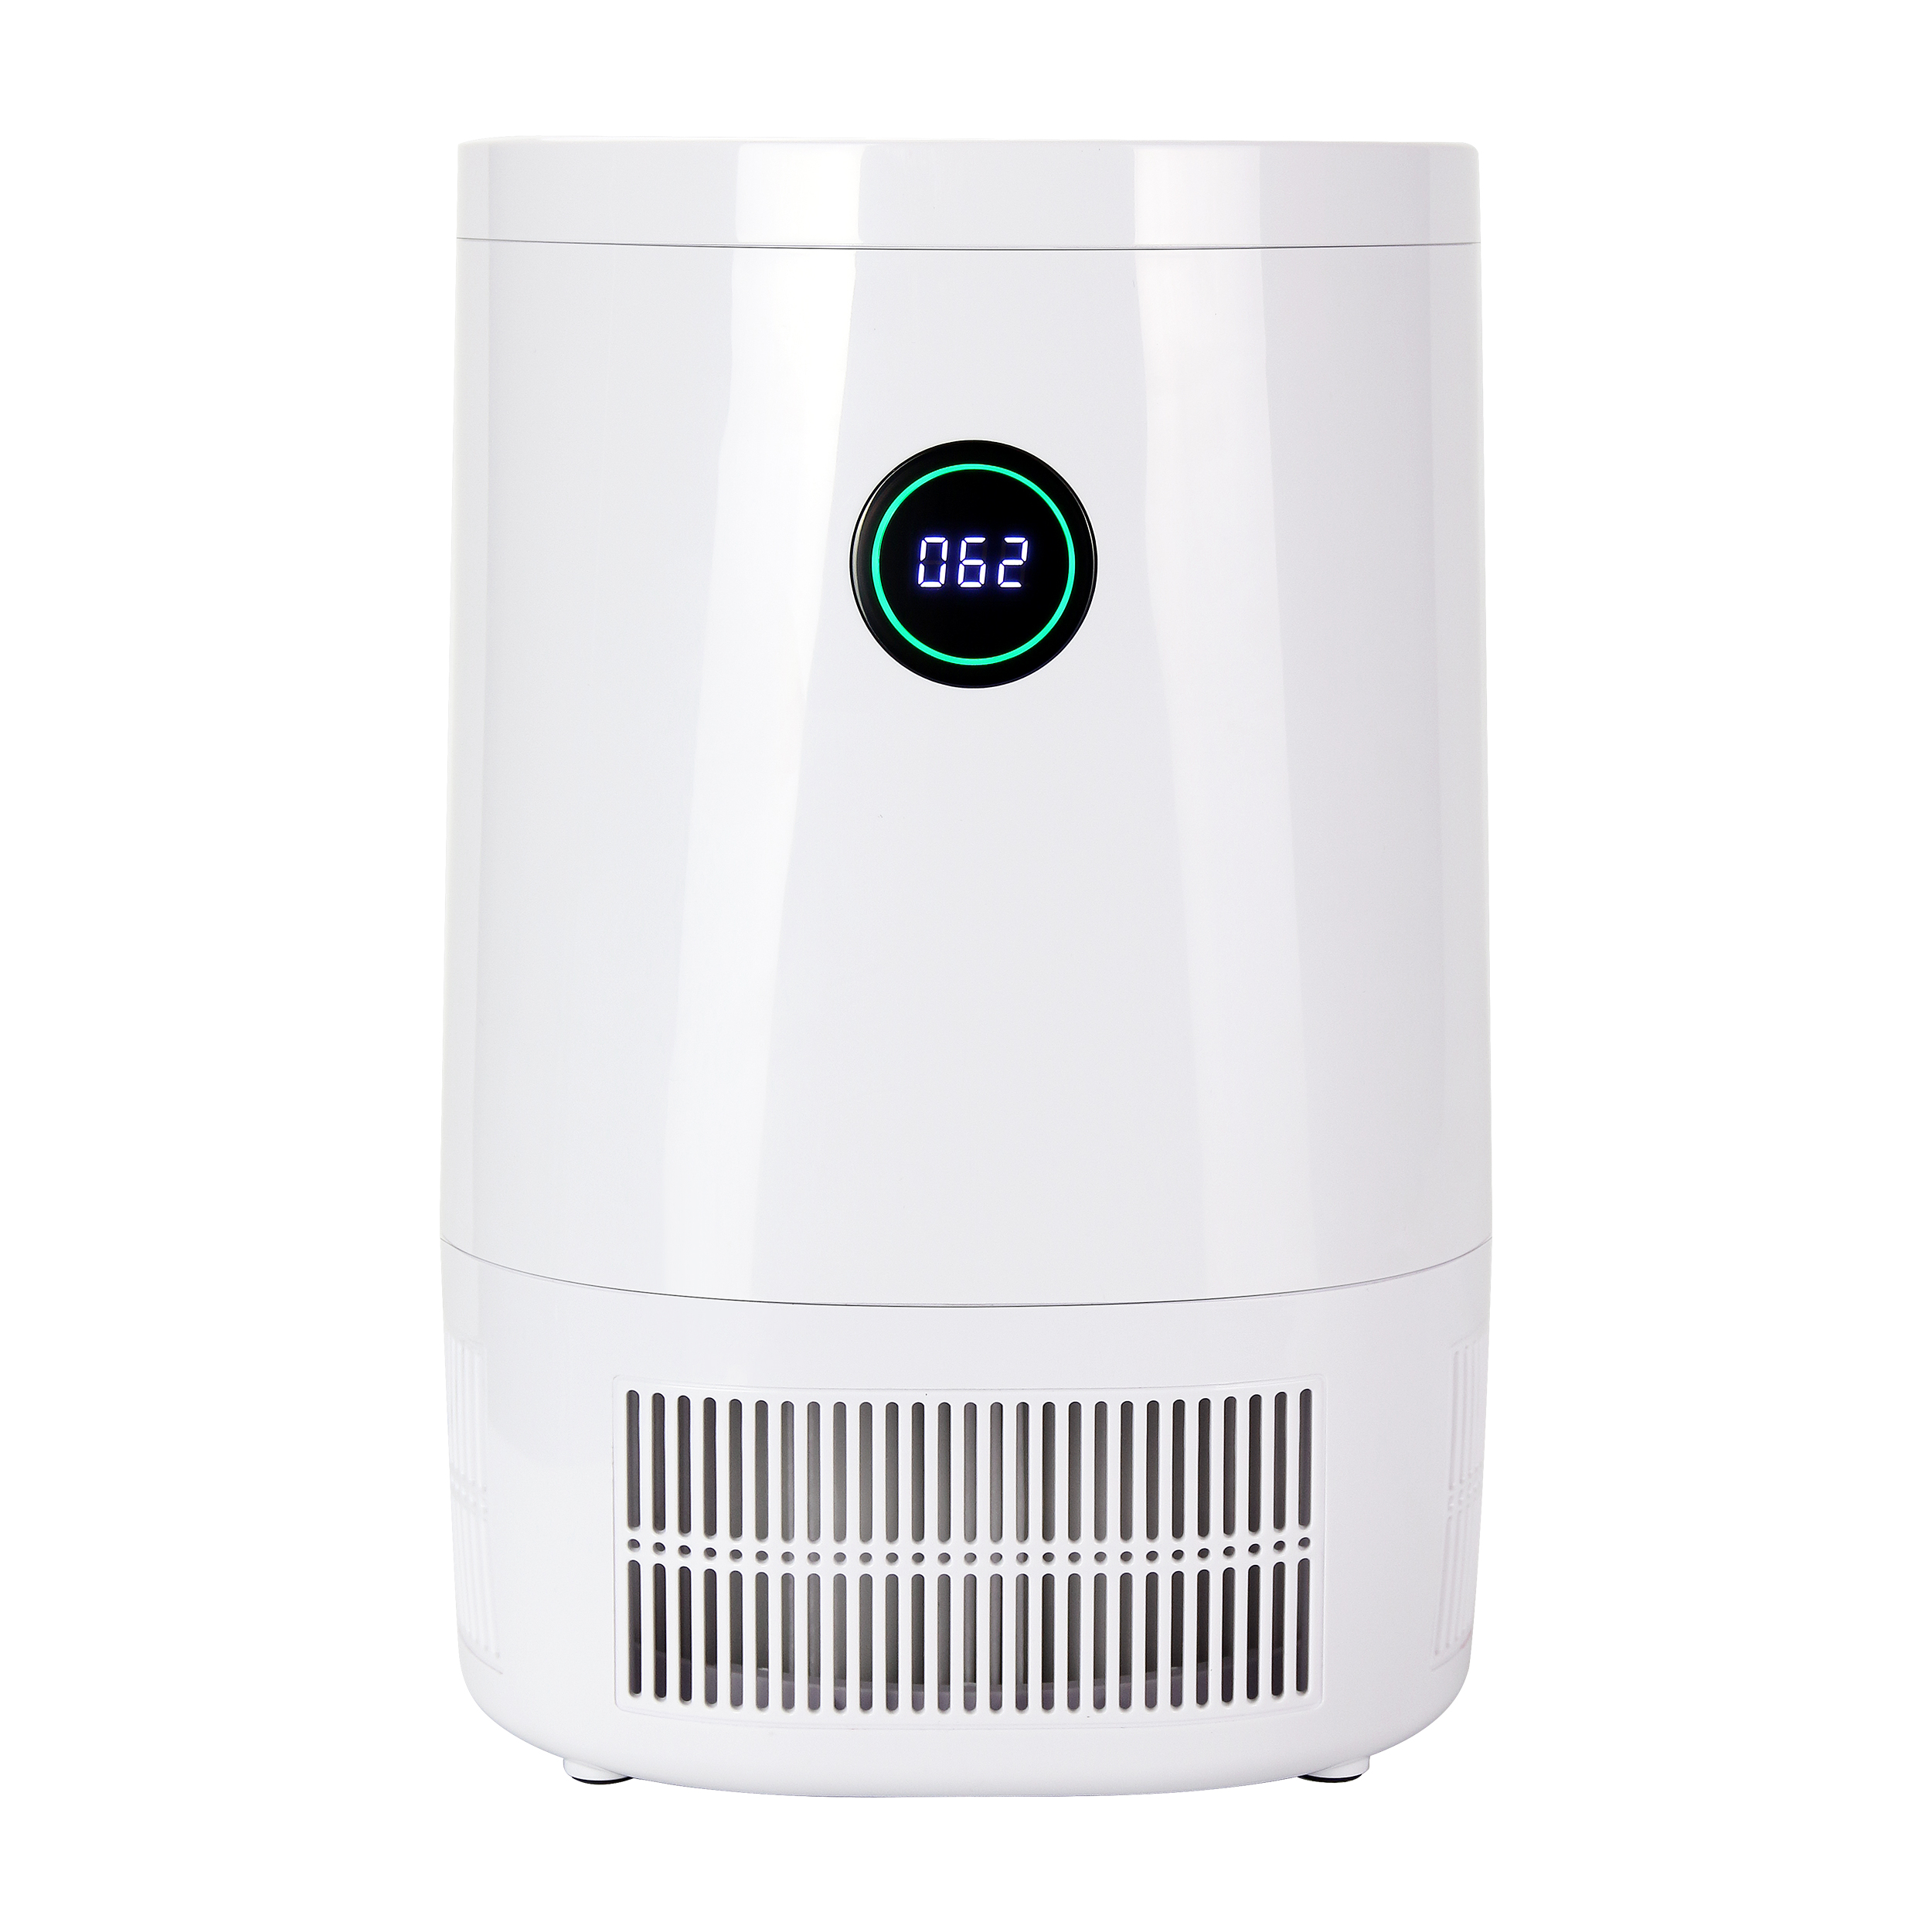 AM-180 Desktop Air Purifier with Multi Function Touch Control Panel and PM2.5 display